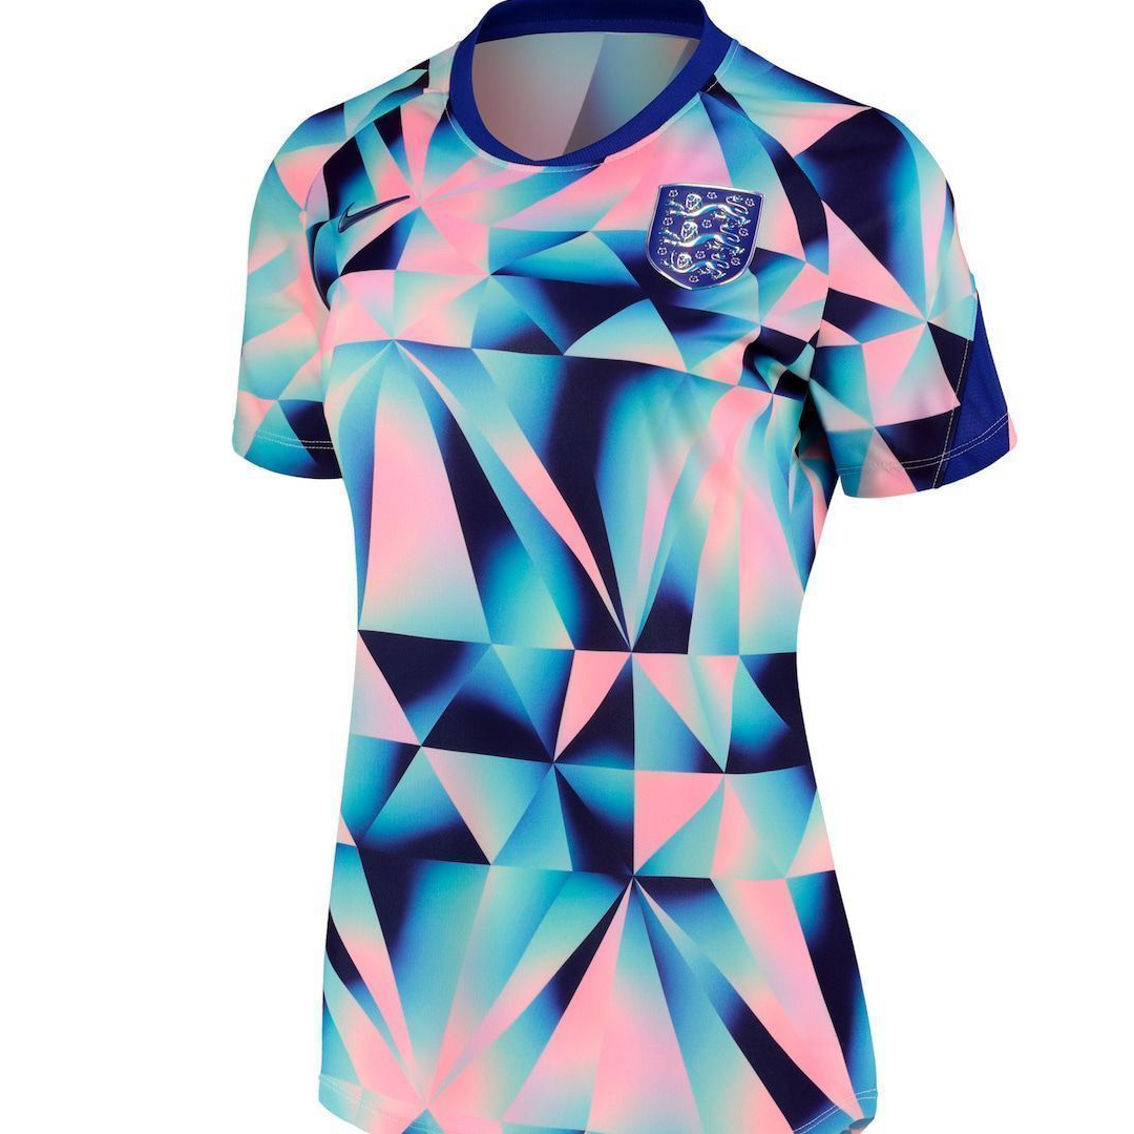 Nike Women's Blue England National Team 2022/23 Pre-Match Home Performance Top - Image 3 of 4